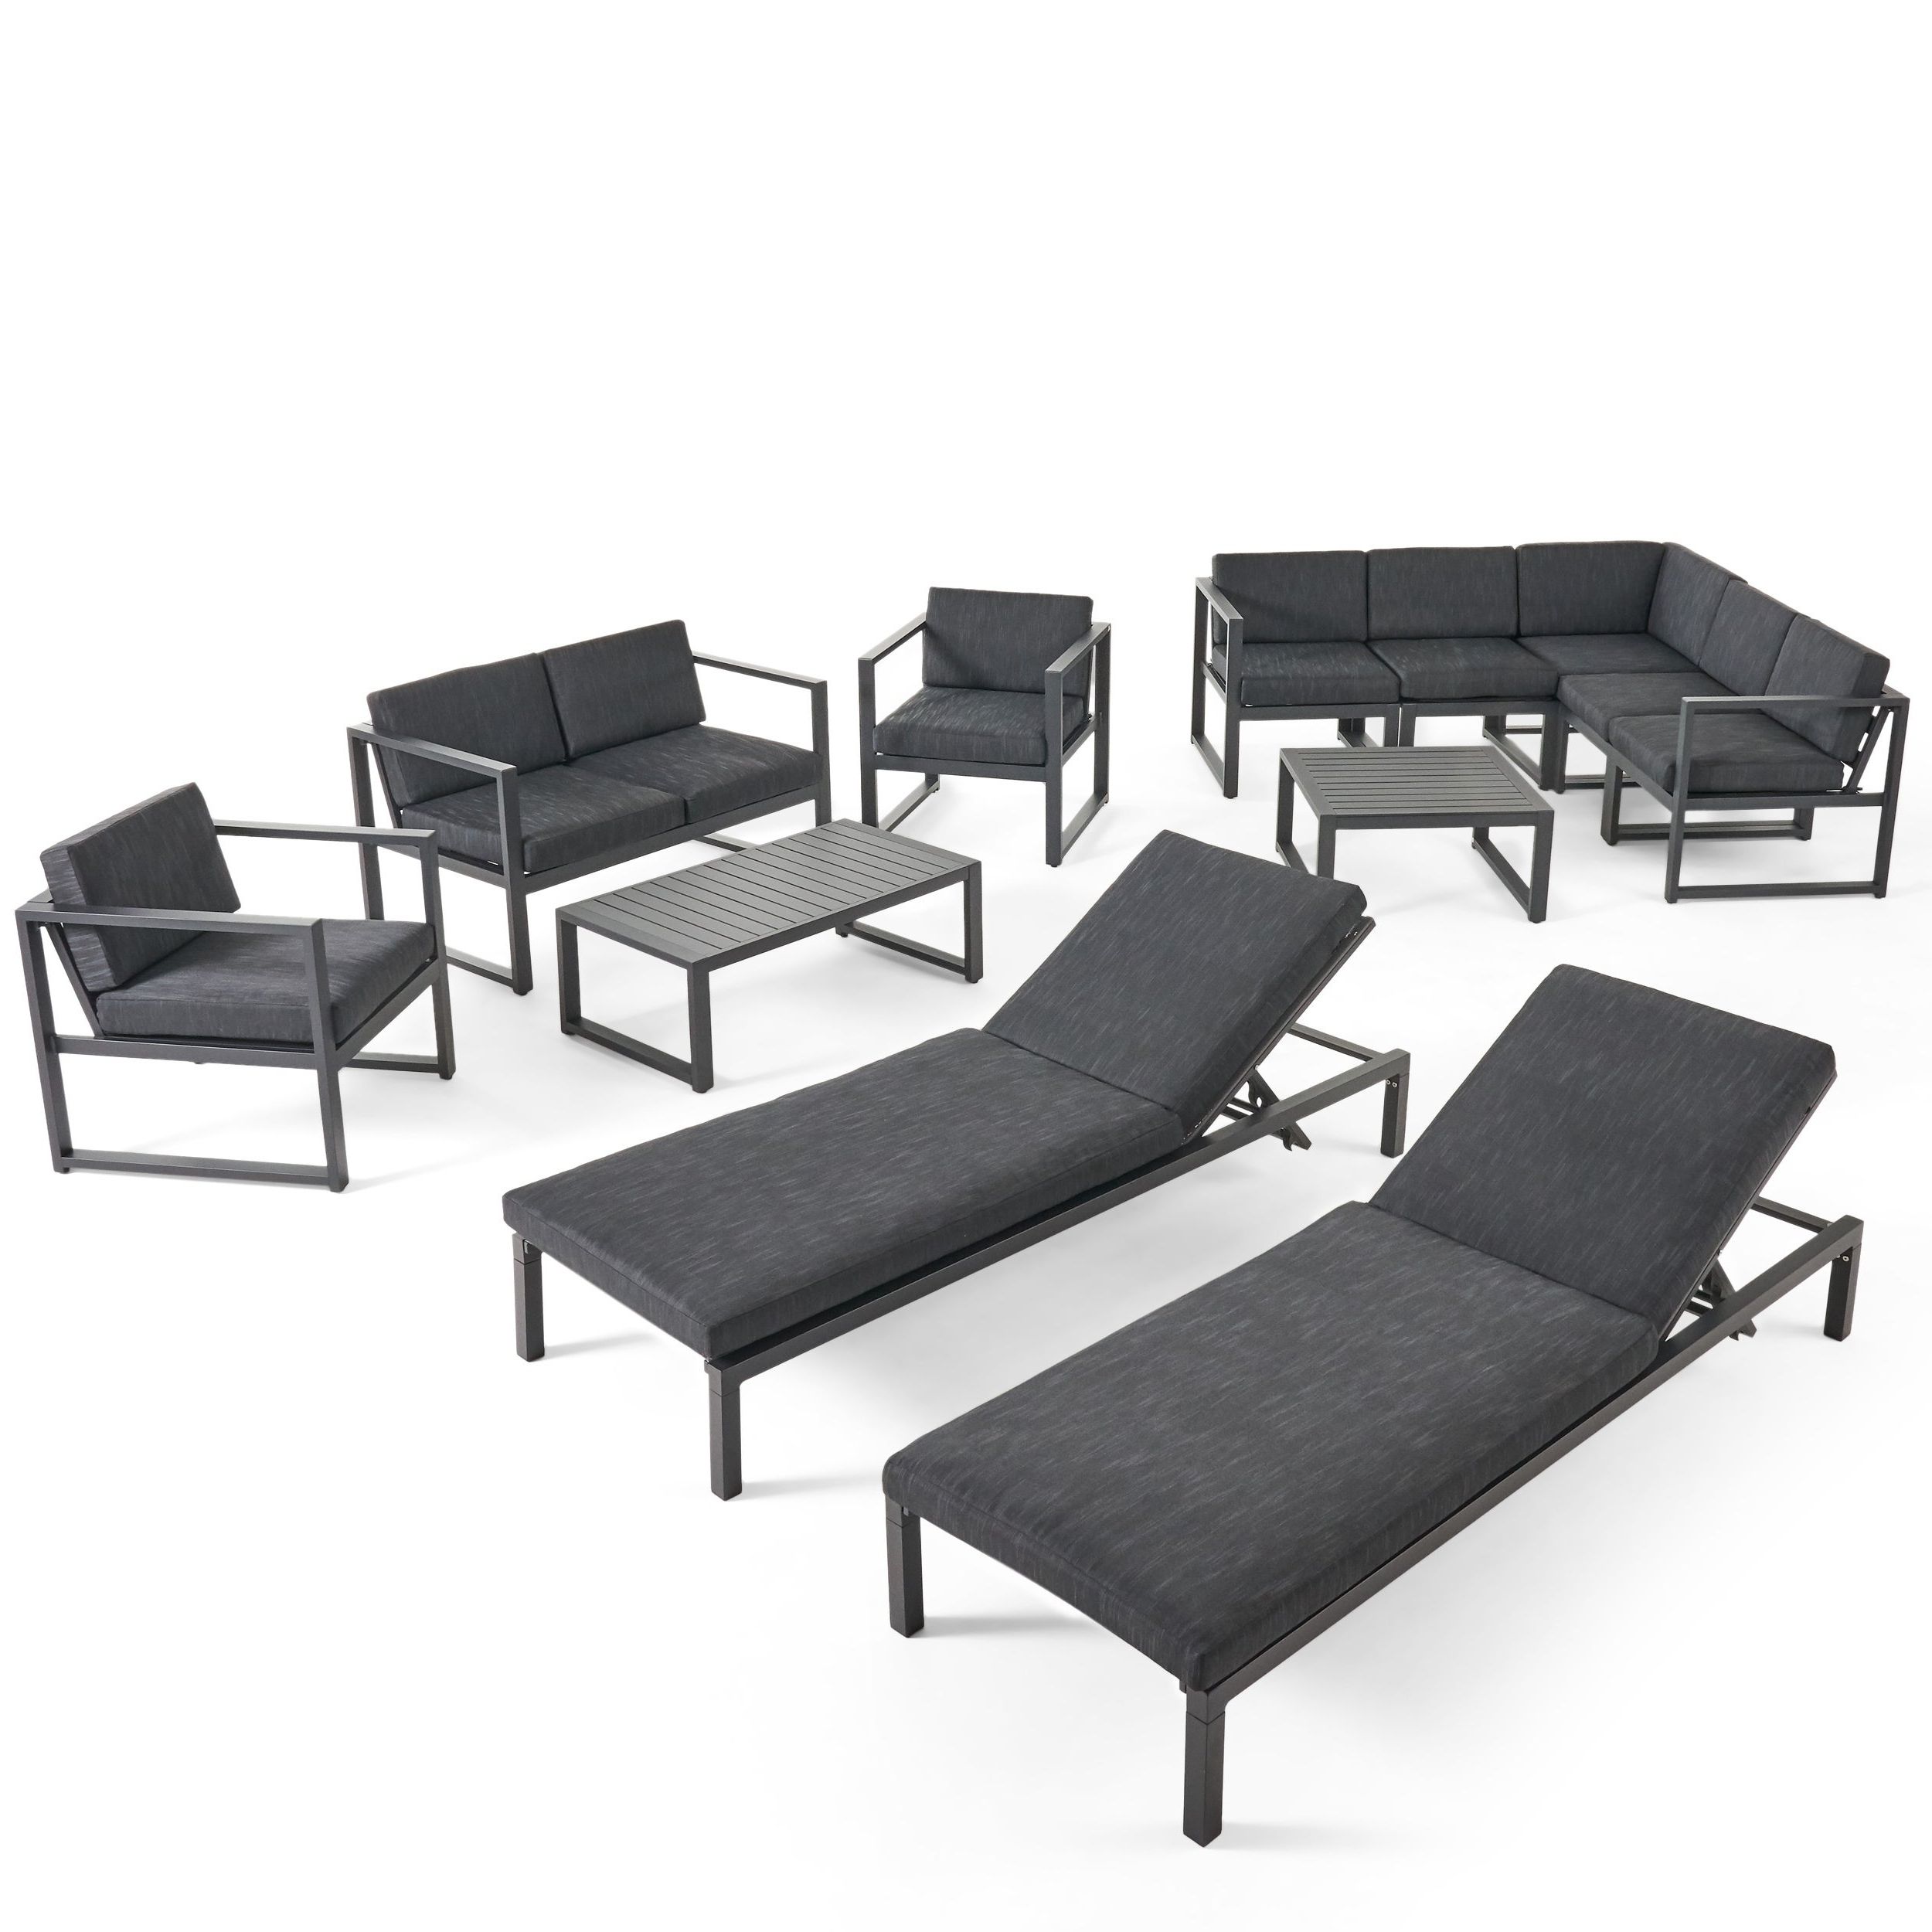 Famous Navan Outdoor Aluminum Chaise Lounges With Cushion With Navan Outdoor 9 Seater Aluminum Sectional Sofa Set With Mesh Chaise Lounges Christopher Knight Home (View 24 of 25)